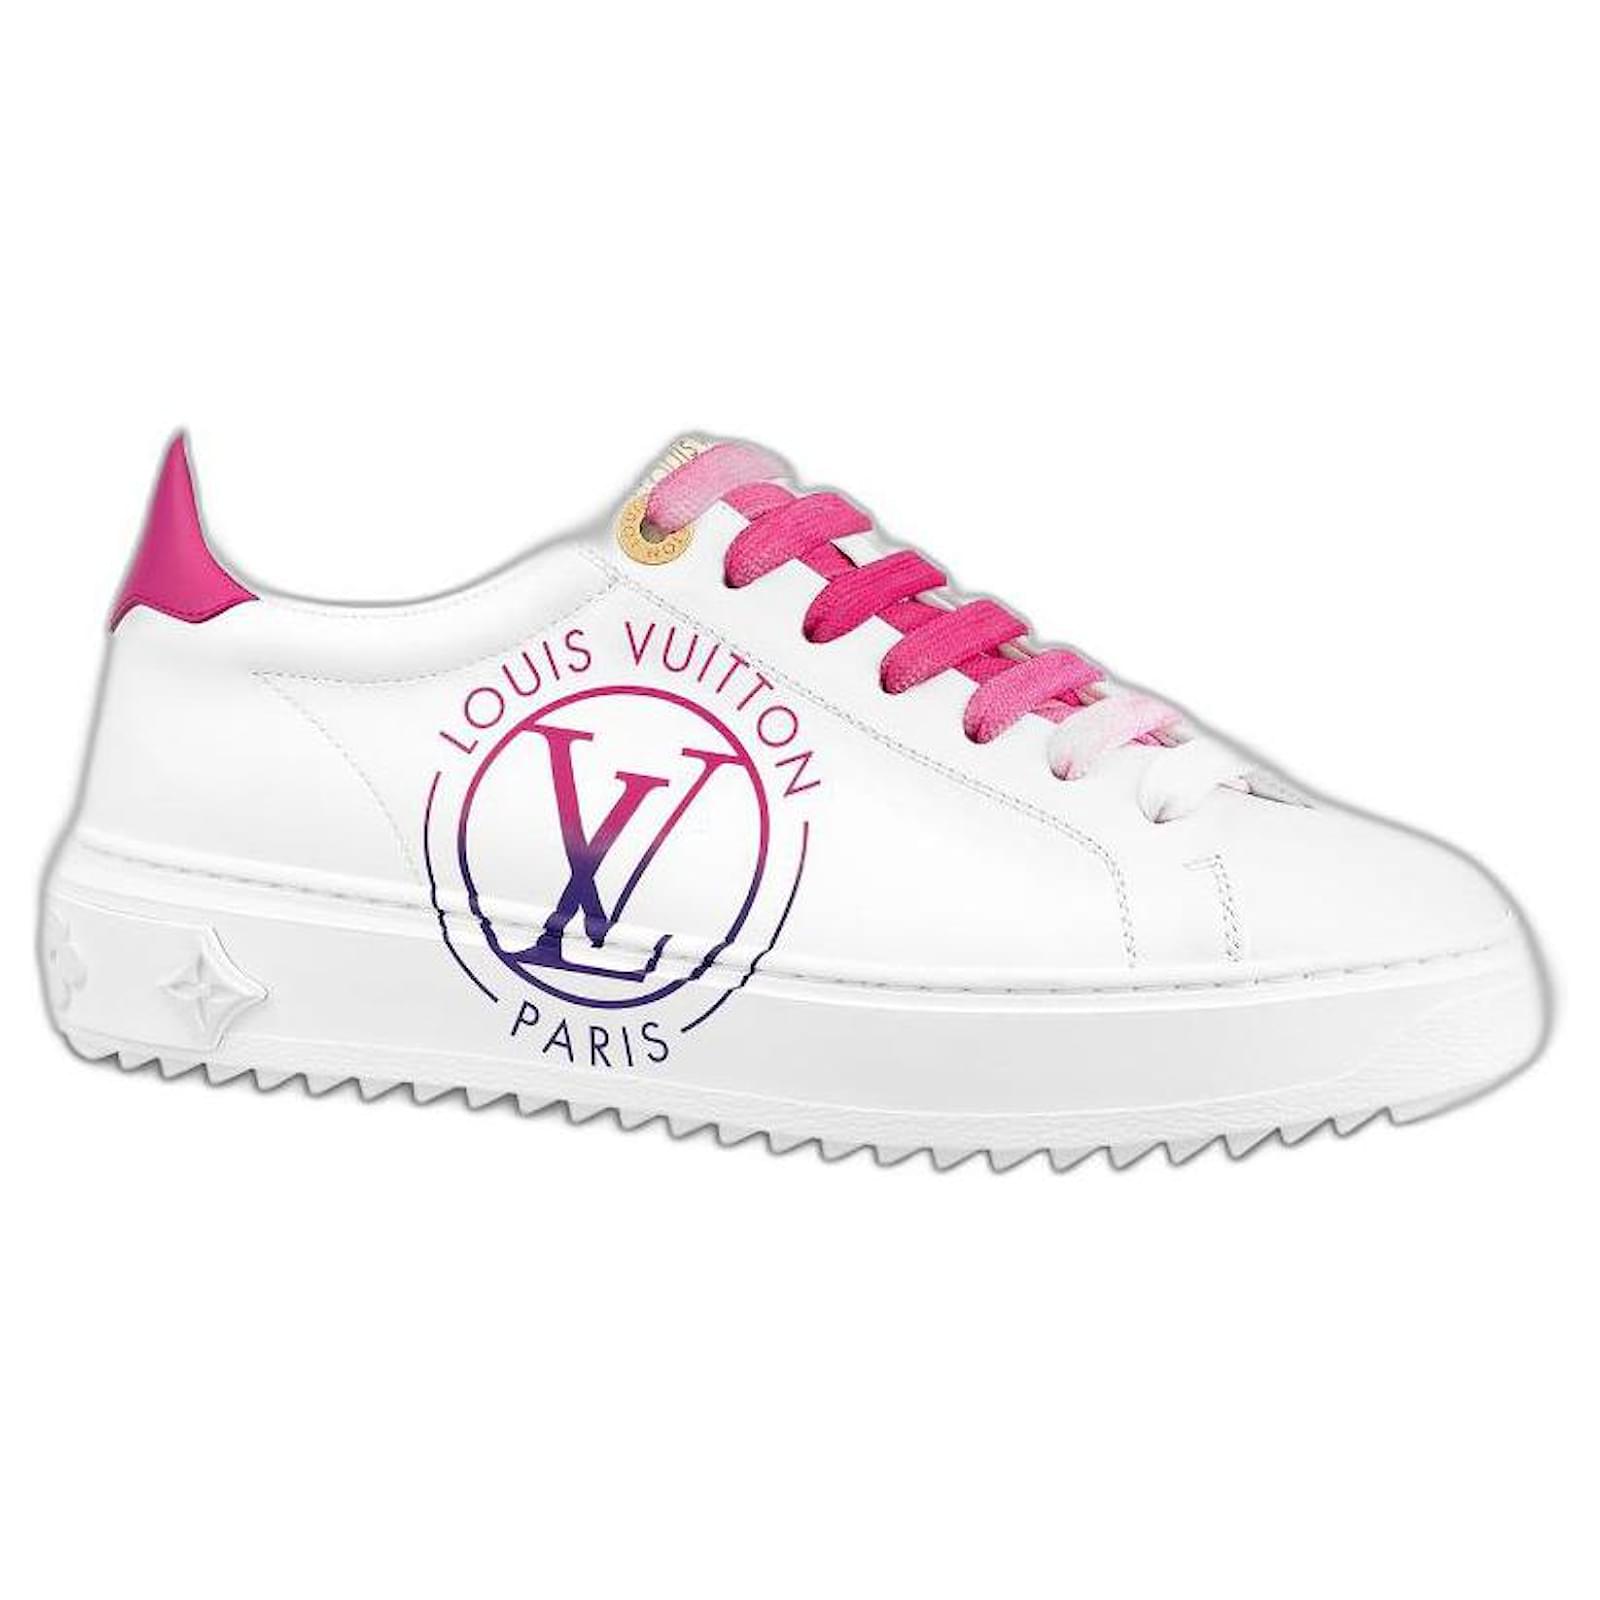 Louis Vuitton TIME OUT SNEAKER light pink  Louis vuitton shoes, Louis  vuitton, Sneakers